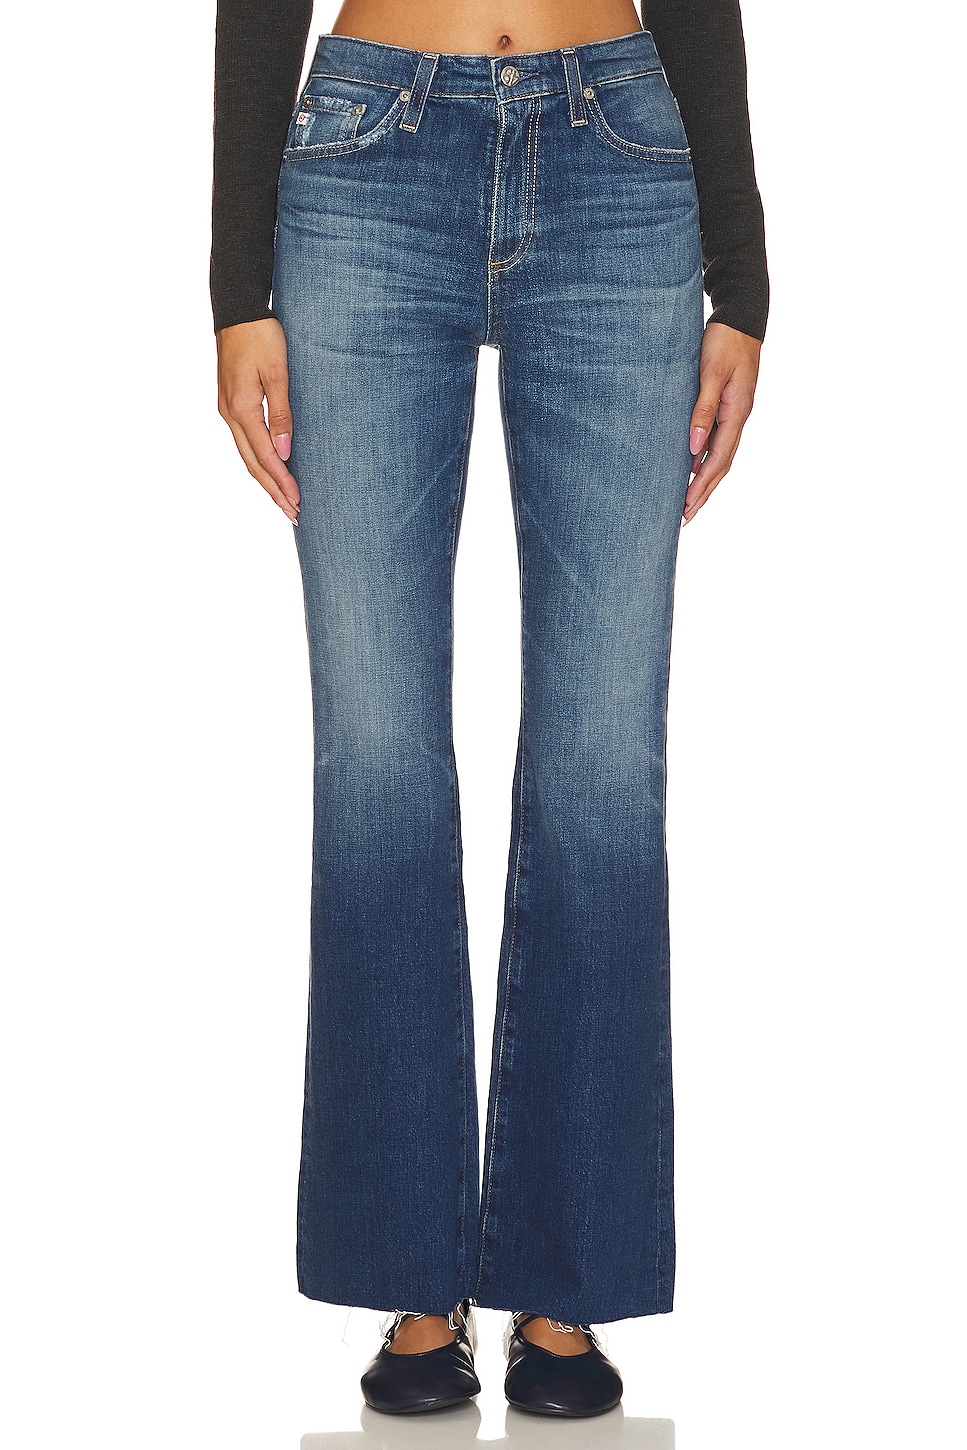 AG Jeans Low-Rise Bootcut Jeans in Blue